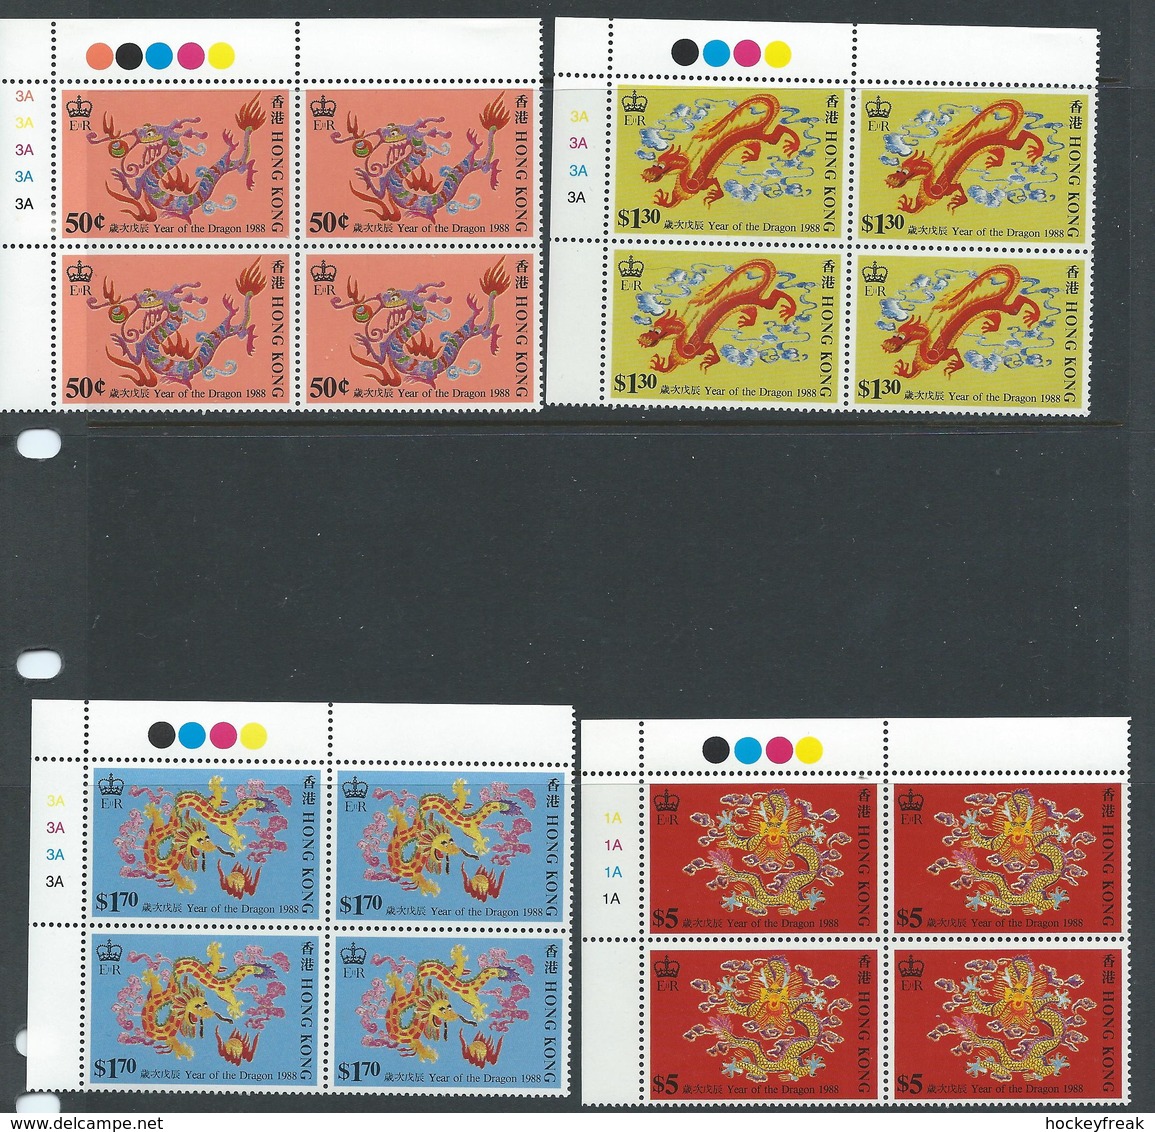 Hong Kong 1988 Year Of The Dragon - Plate Blocks Of 4 SG563-566 MNH Cat £24+ SG2015 - Unused Stamps